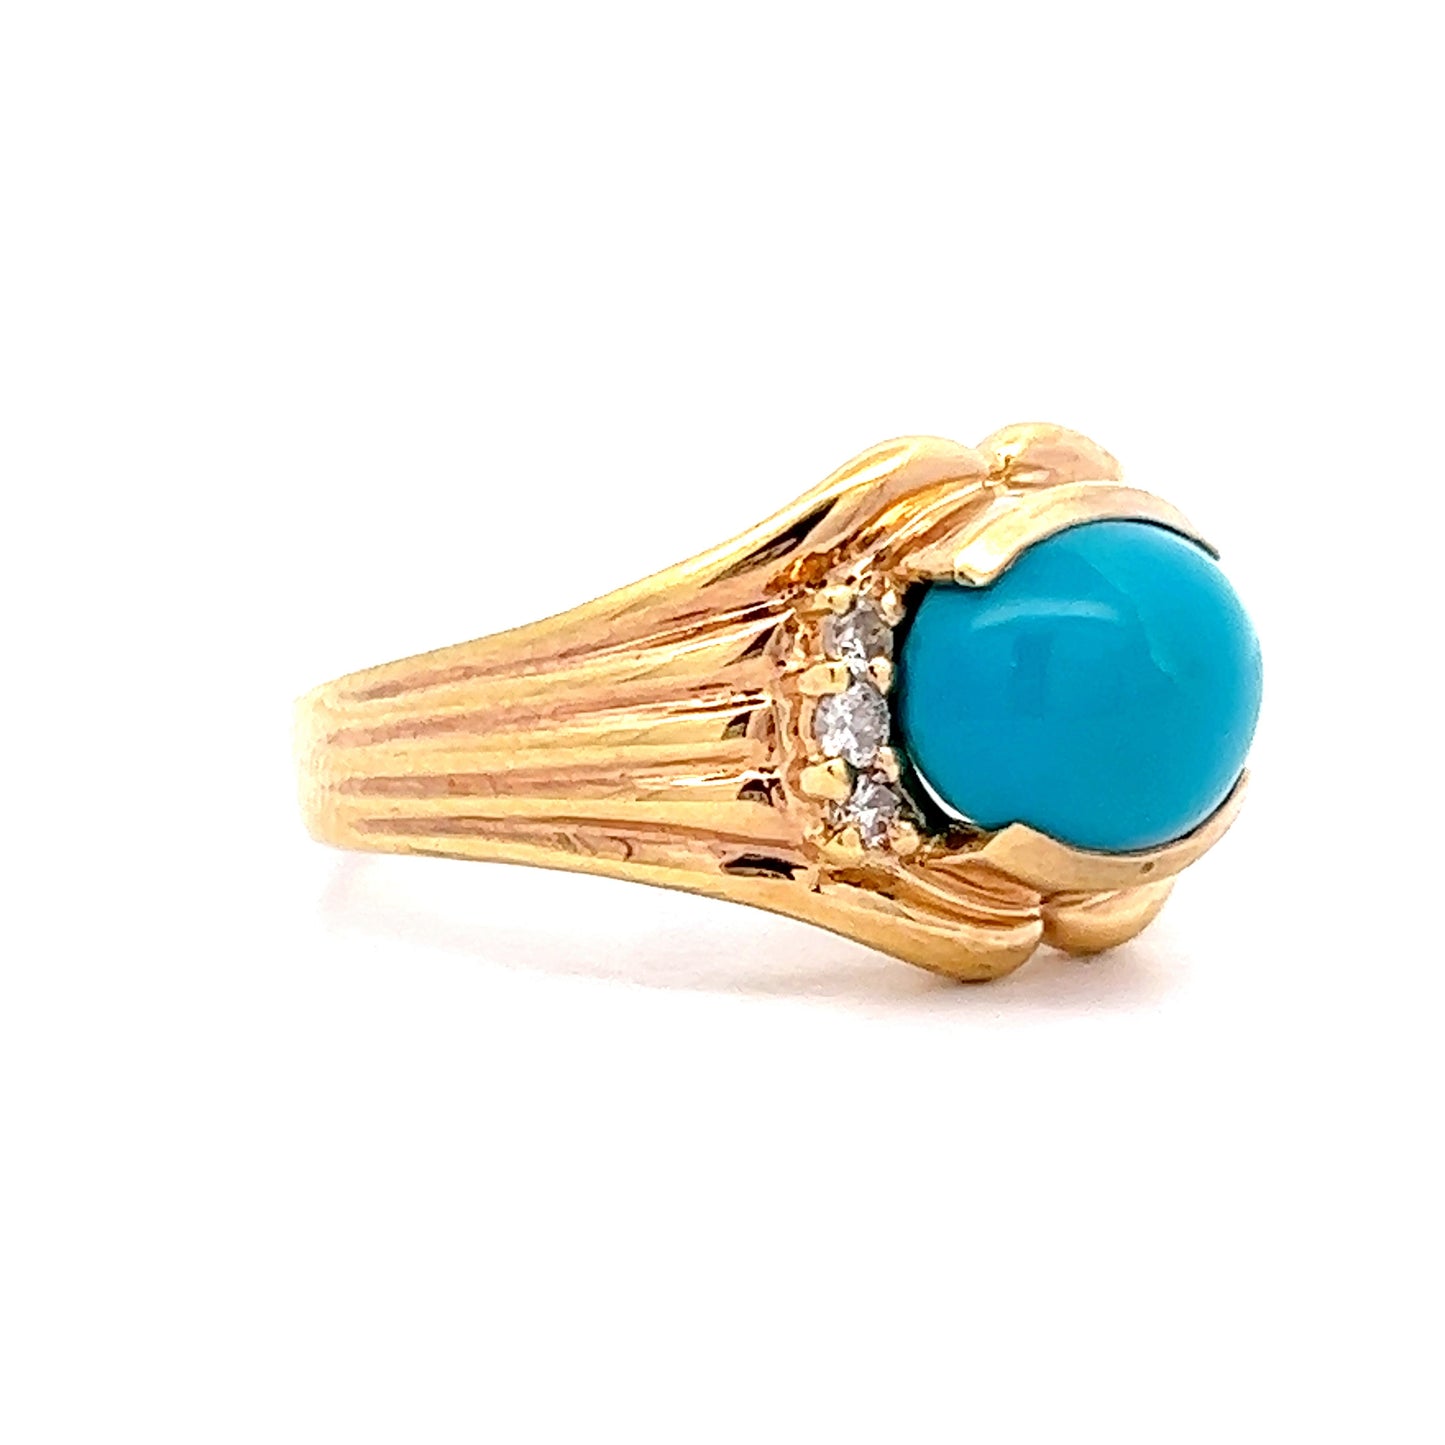 2.92 Turquoise & Diamond Cocktail Ring in 14k Yellow Gold